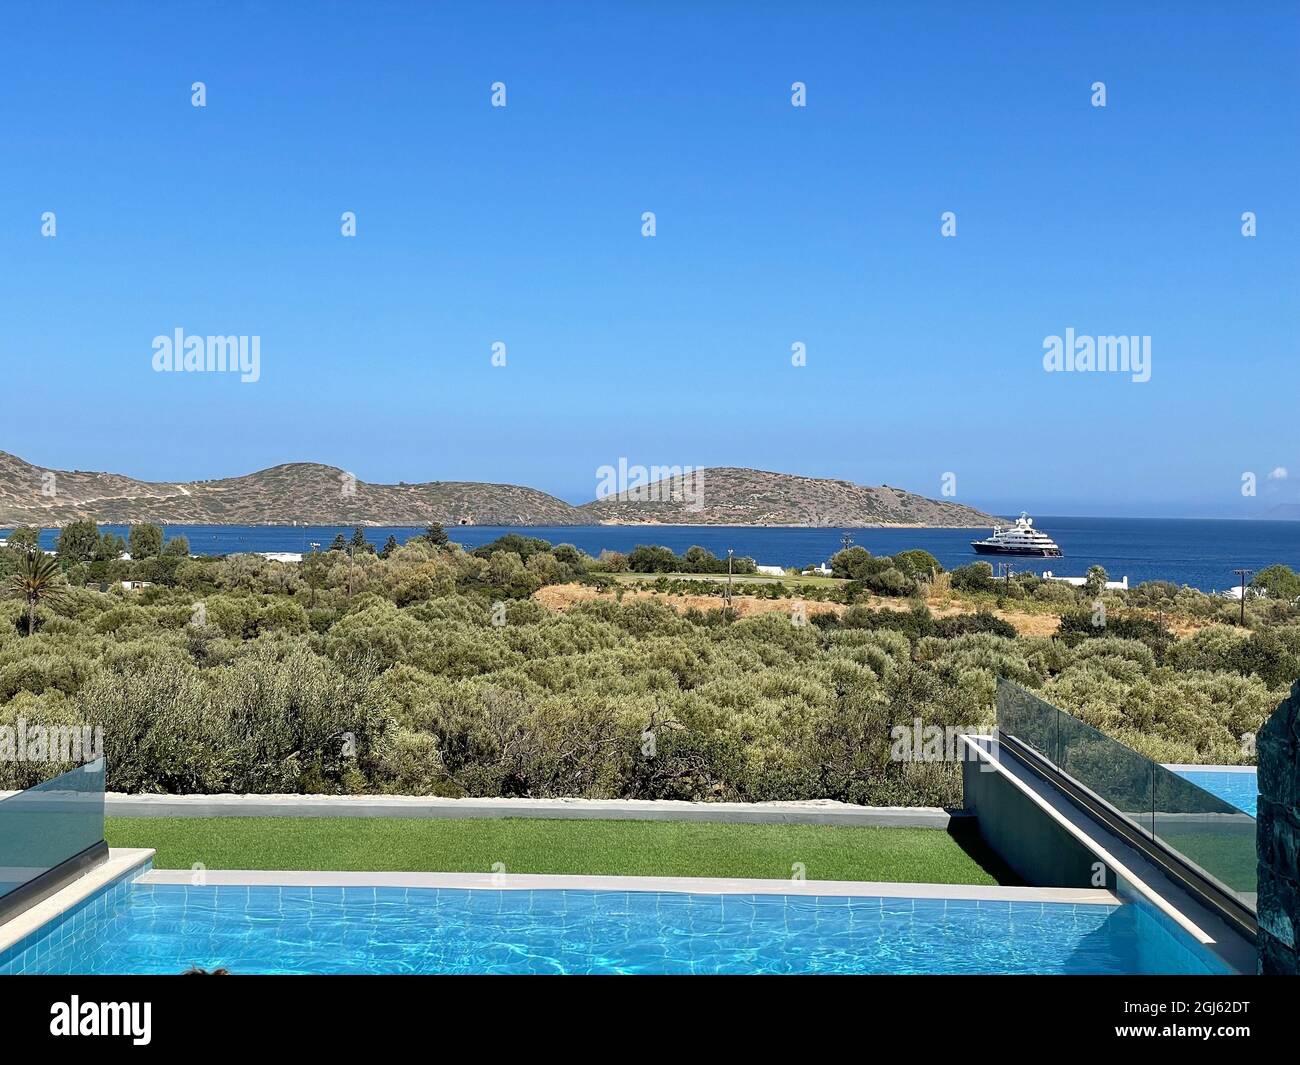 outdoor swimming pool on the island of Crete Stock Photo